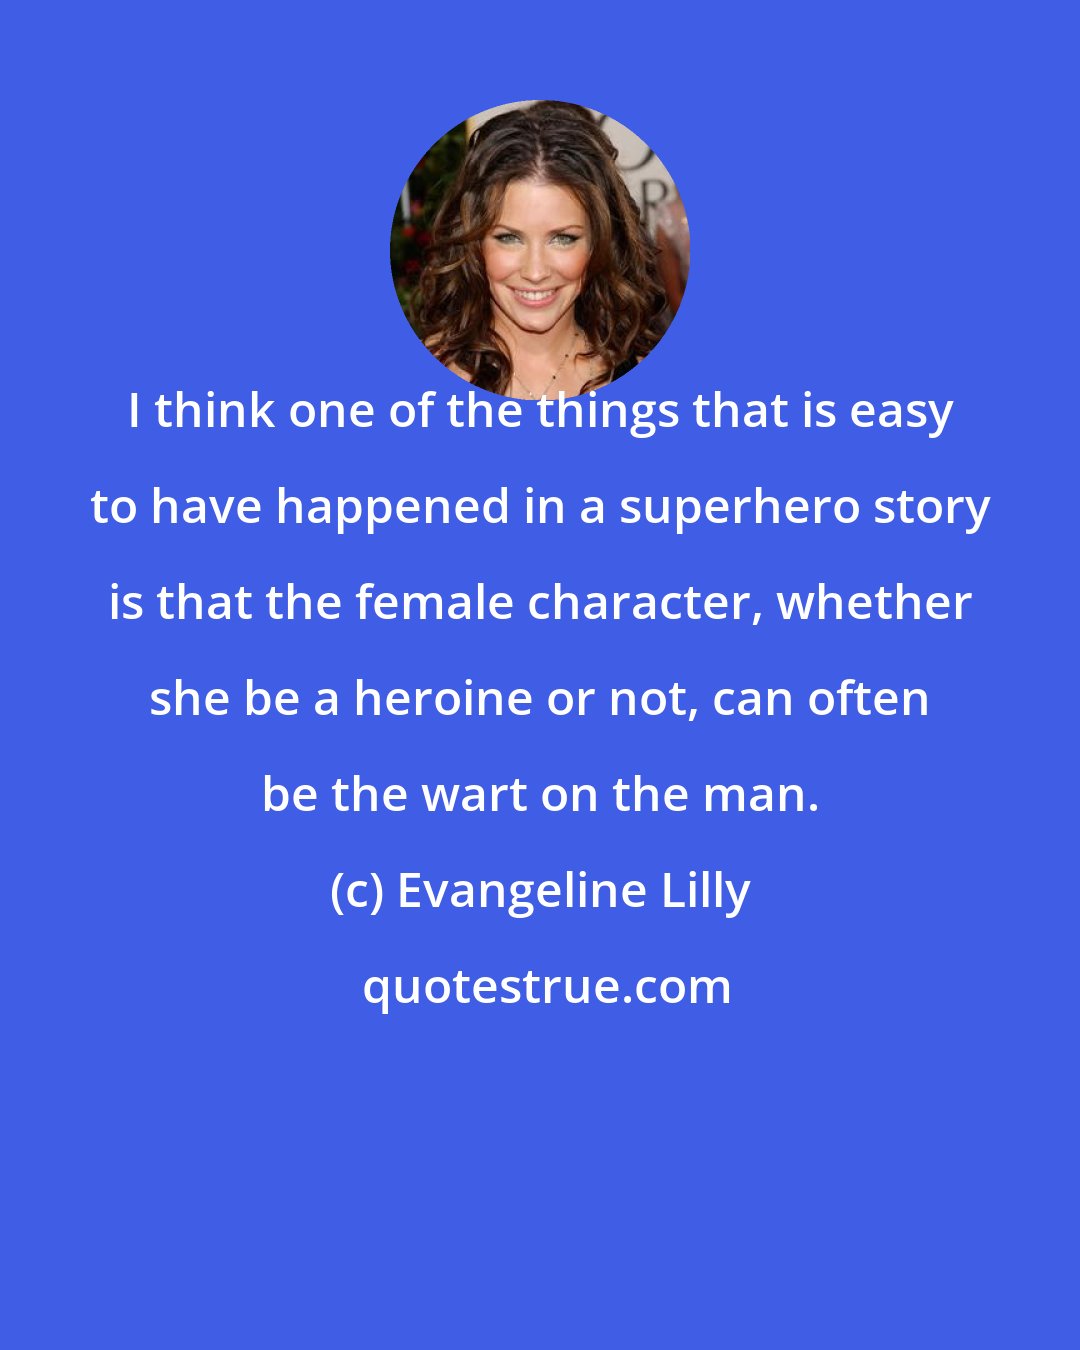 Evangeline Lilly: I think one of the things that is easy to have happened in a superhero story is that the female character, whether she be a heroine or not, can often be the wart on the man.